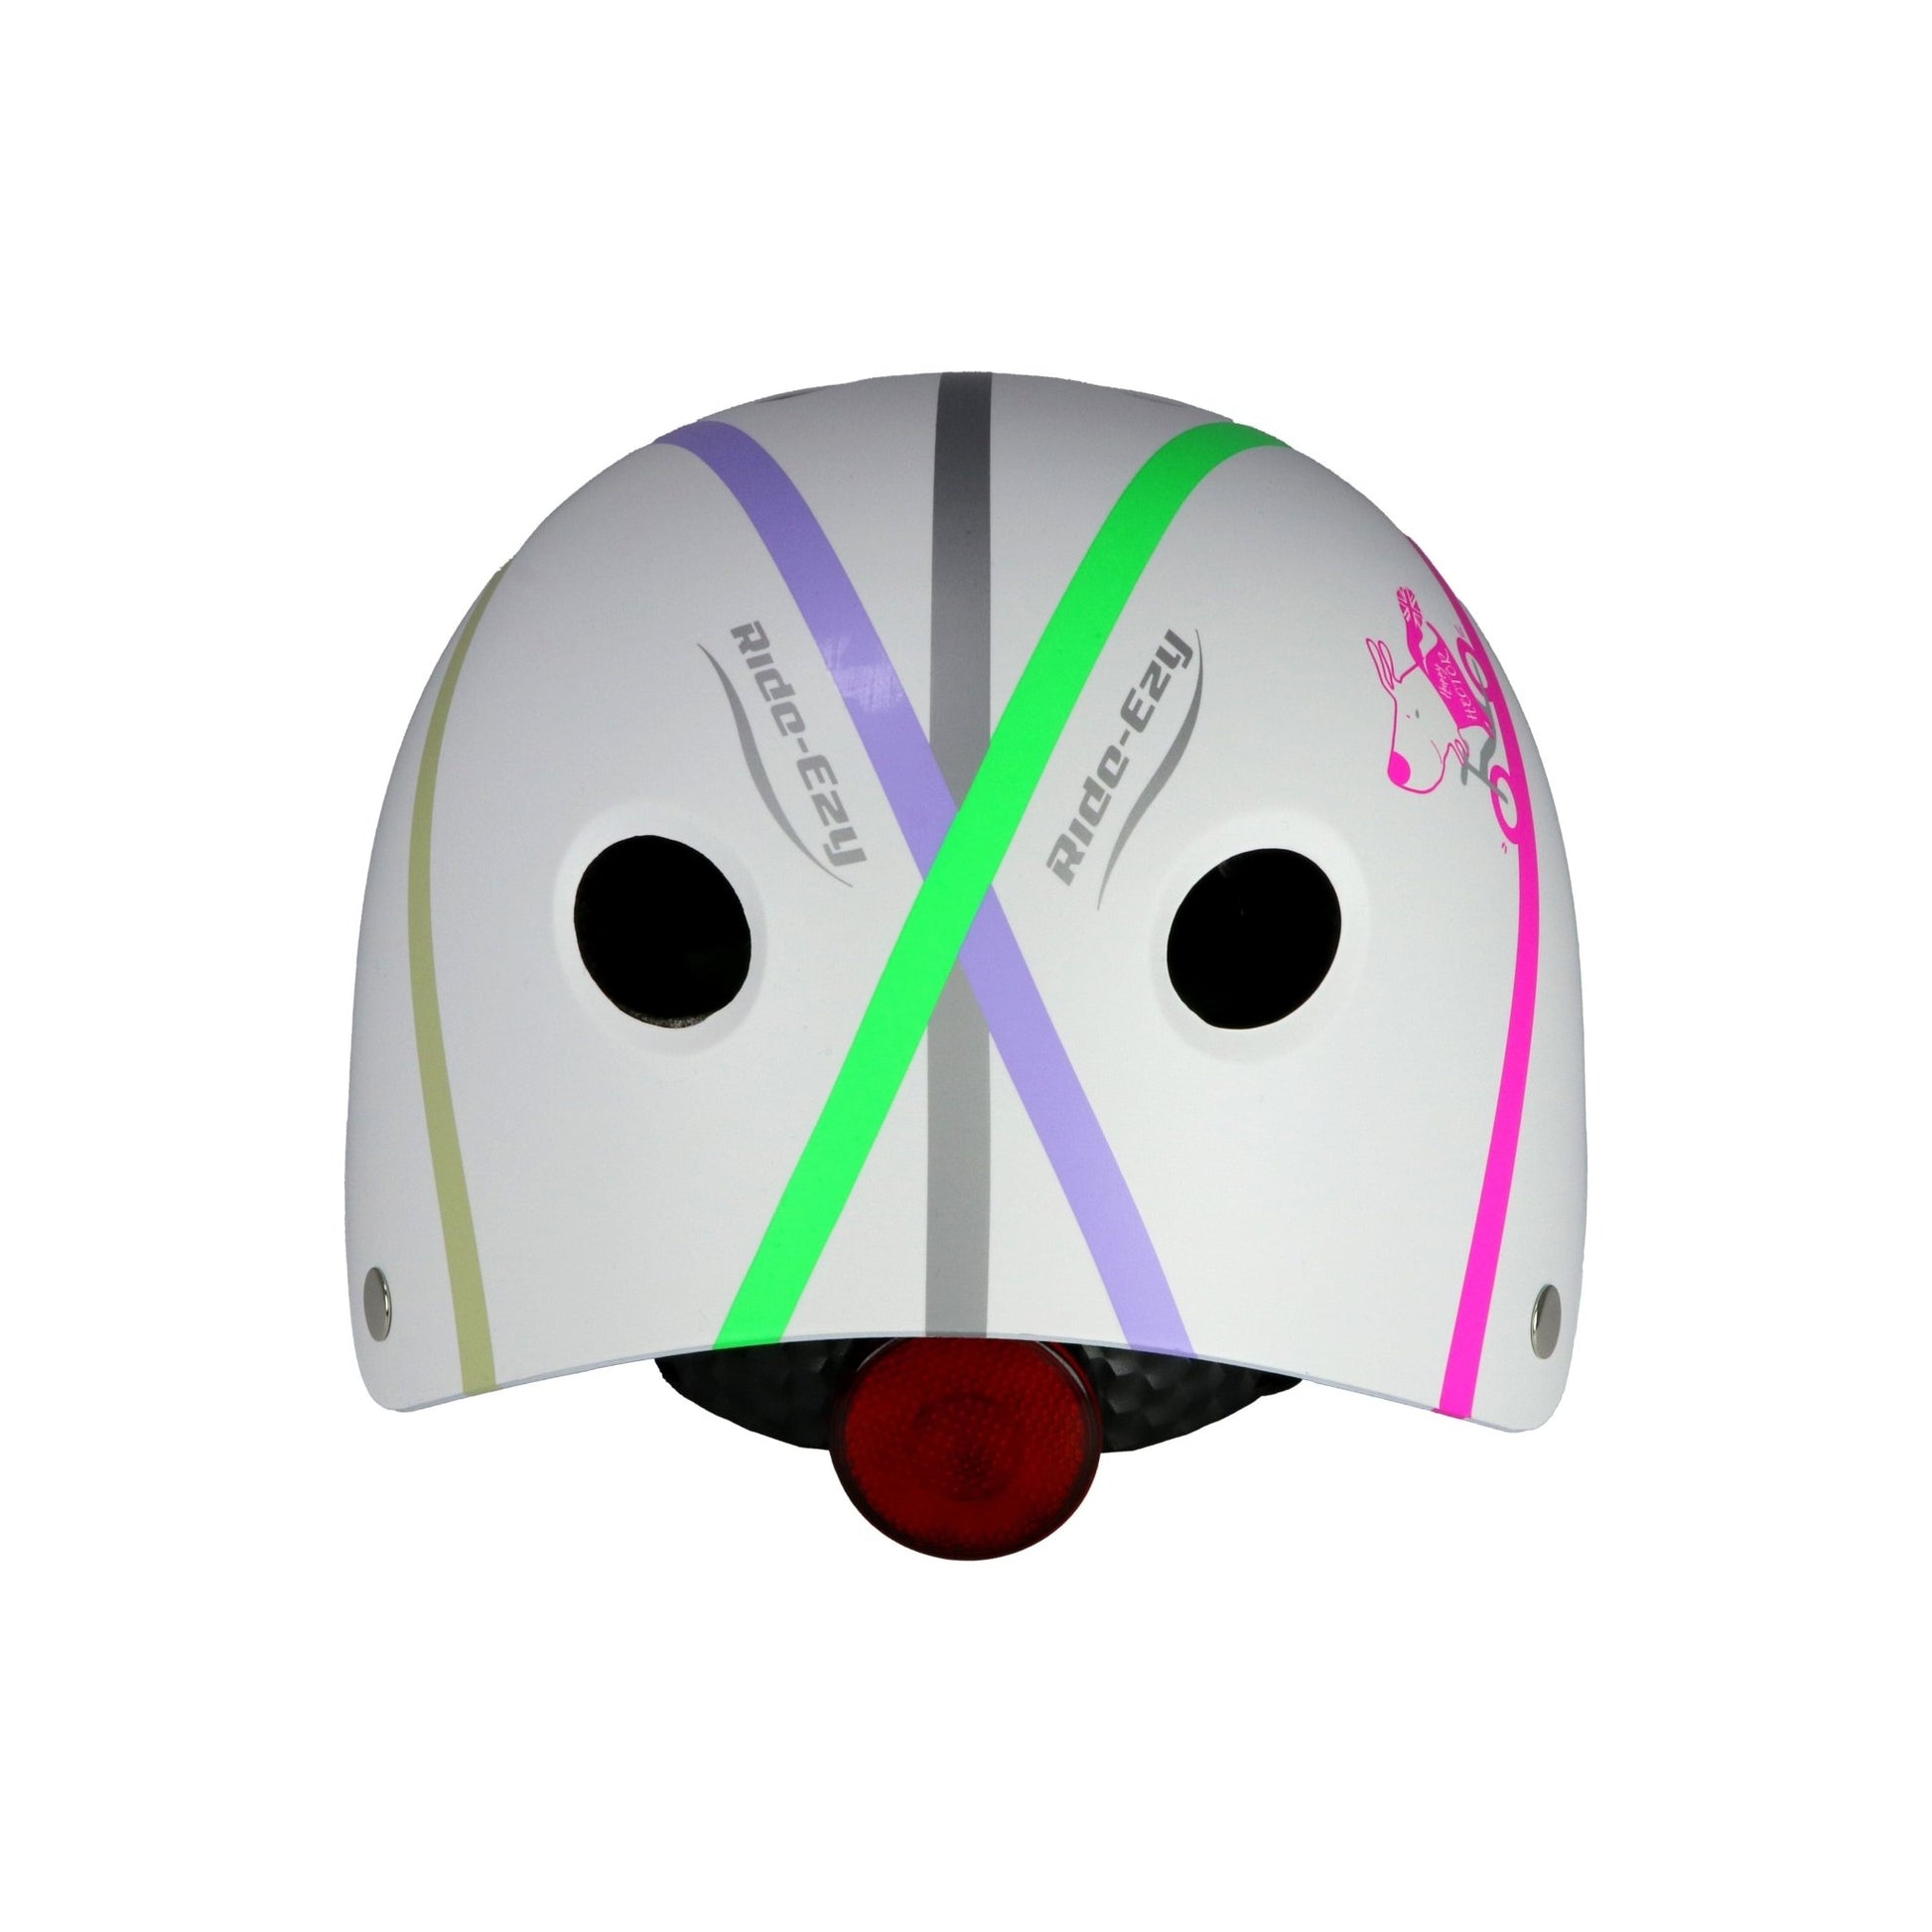 Ride-Ezy Hector 48-53cms Kids Helmet - White rear with safety light